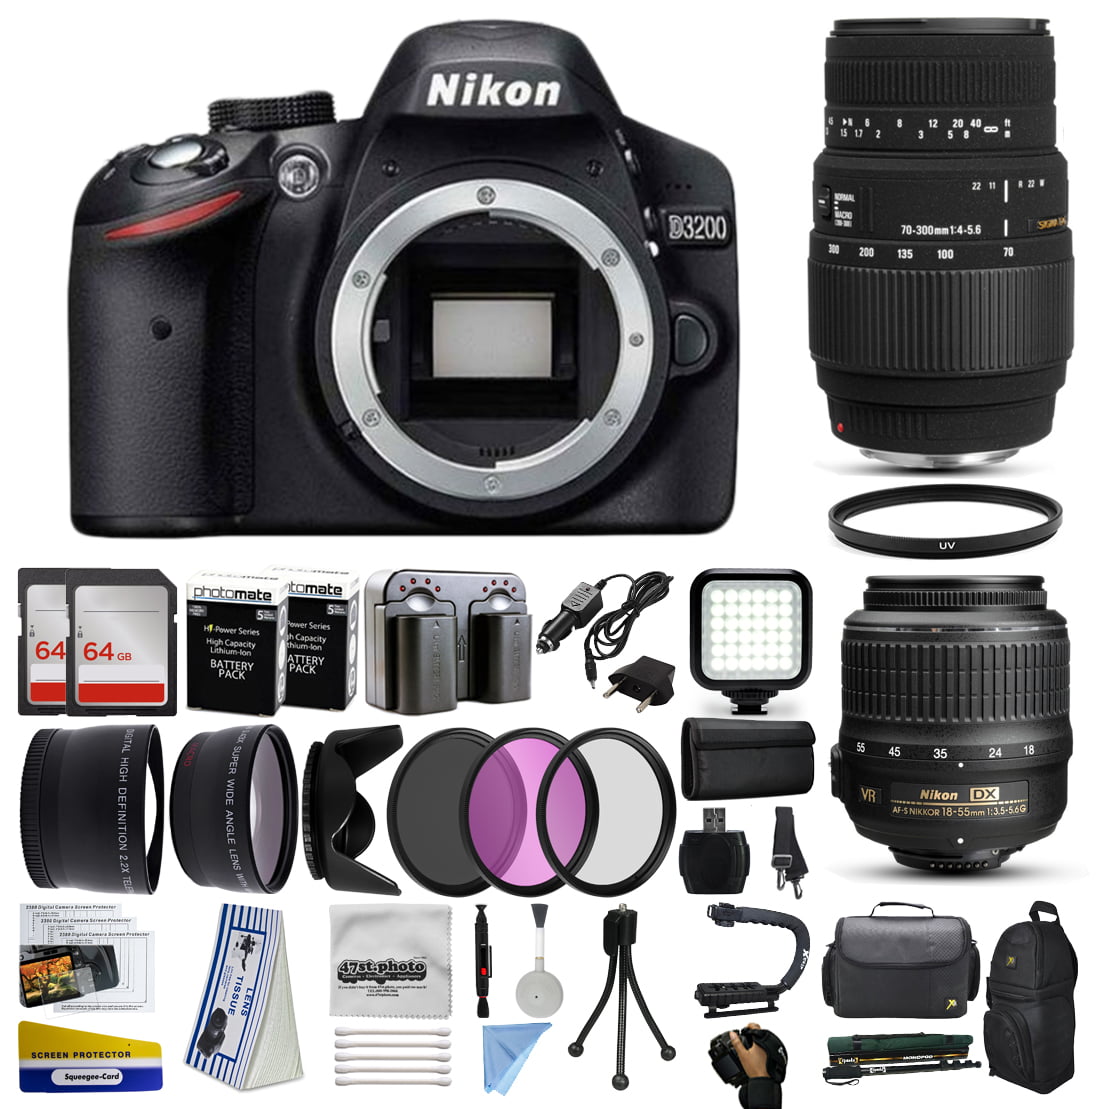 Nikon D3200 DSLR Digital Camera with 18-55mm VR + Sigma 70-300mm Lens +  128GB Memory + 2 Batteries + Charger + LED Video Light + Backpack + Case +  Filters + Auxiliary Lenses + More! 